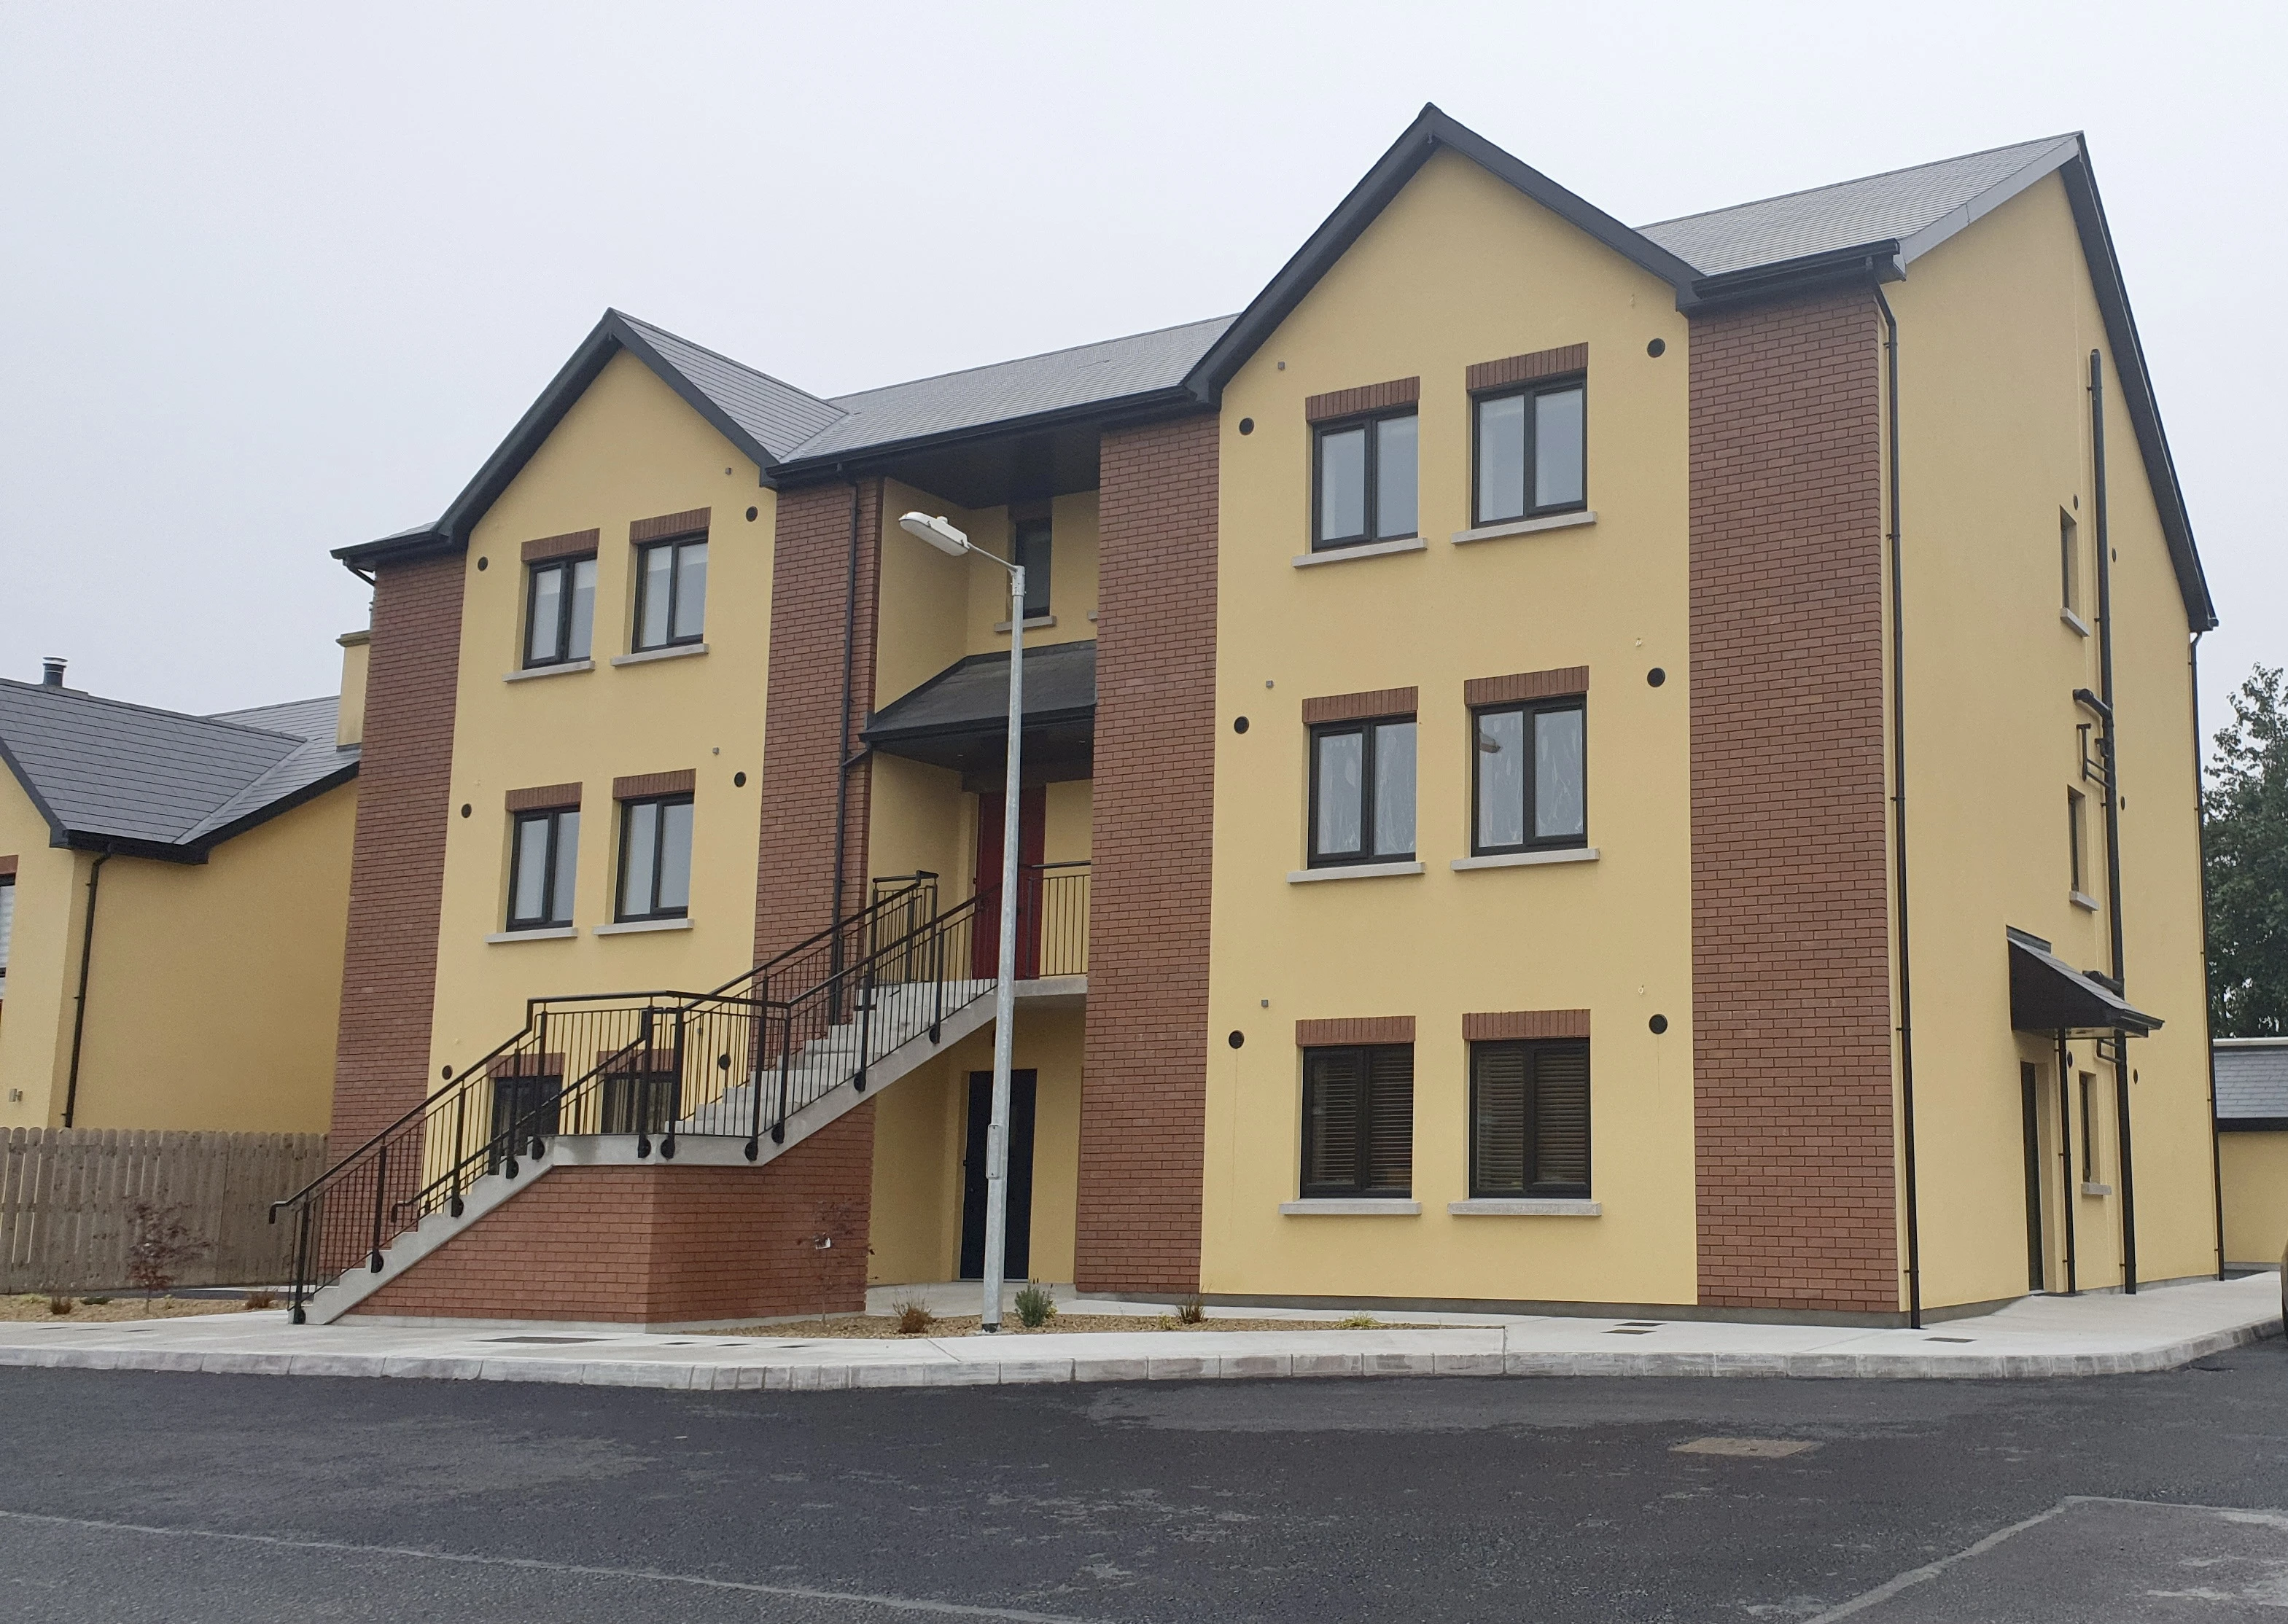 1801-dfk-residential-project-dundalk-rd-doherty-finegan-kelly-civil-structural-engine-1680271521098.jpg